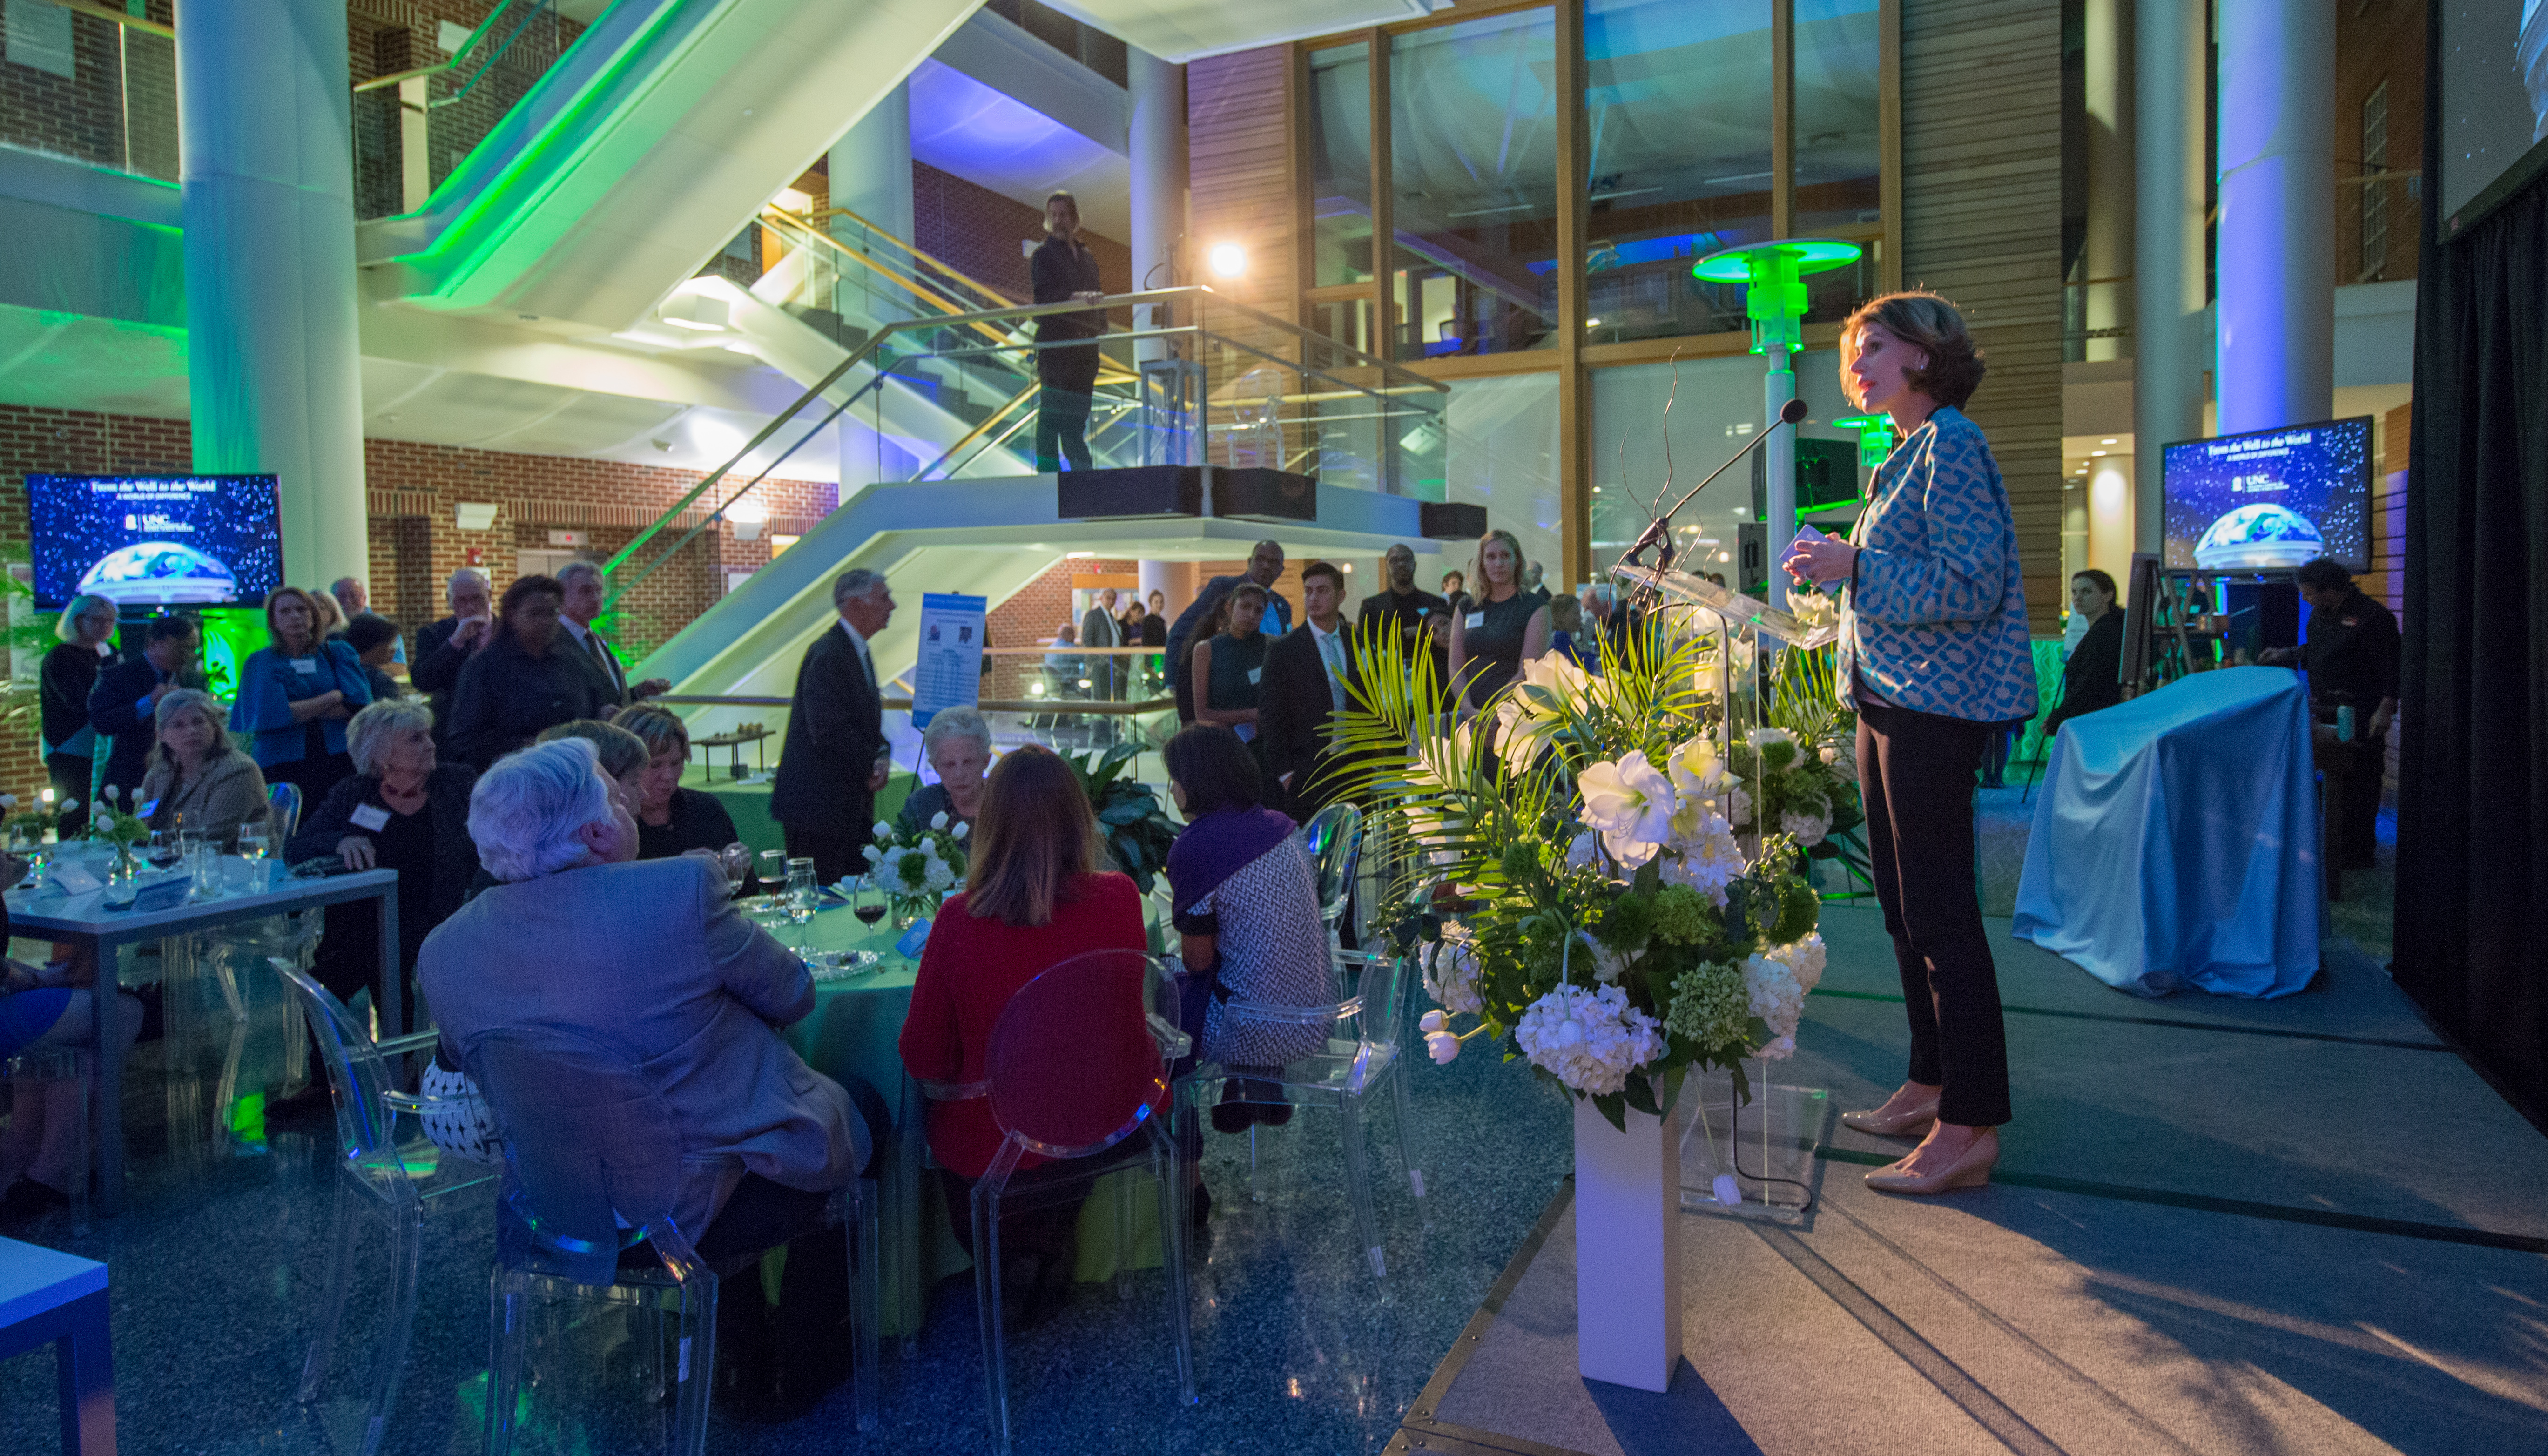 The 2016 World of Difference event was held in Armfield Atrium.